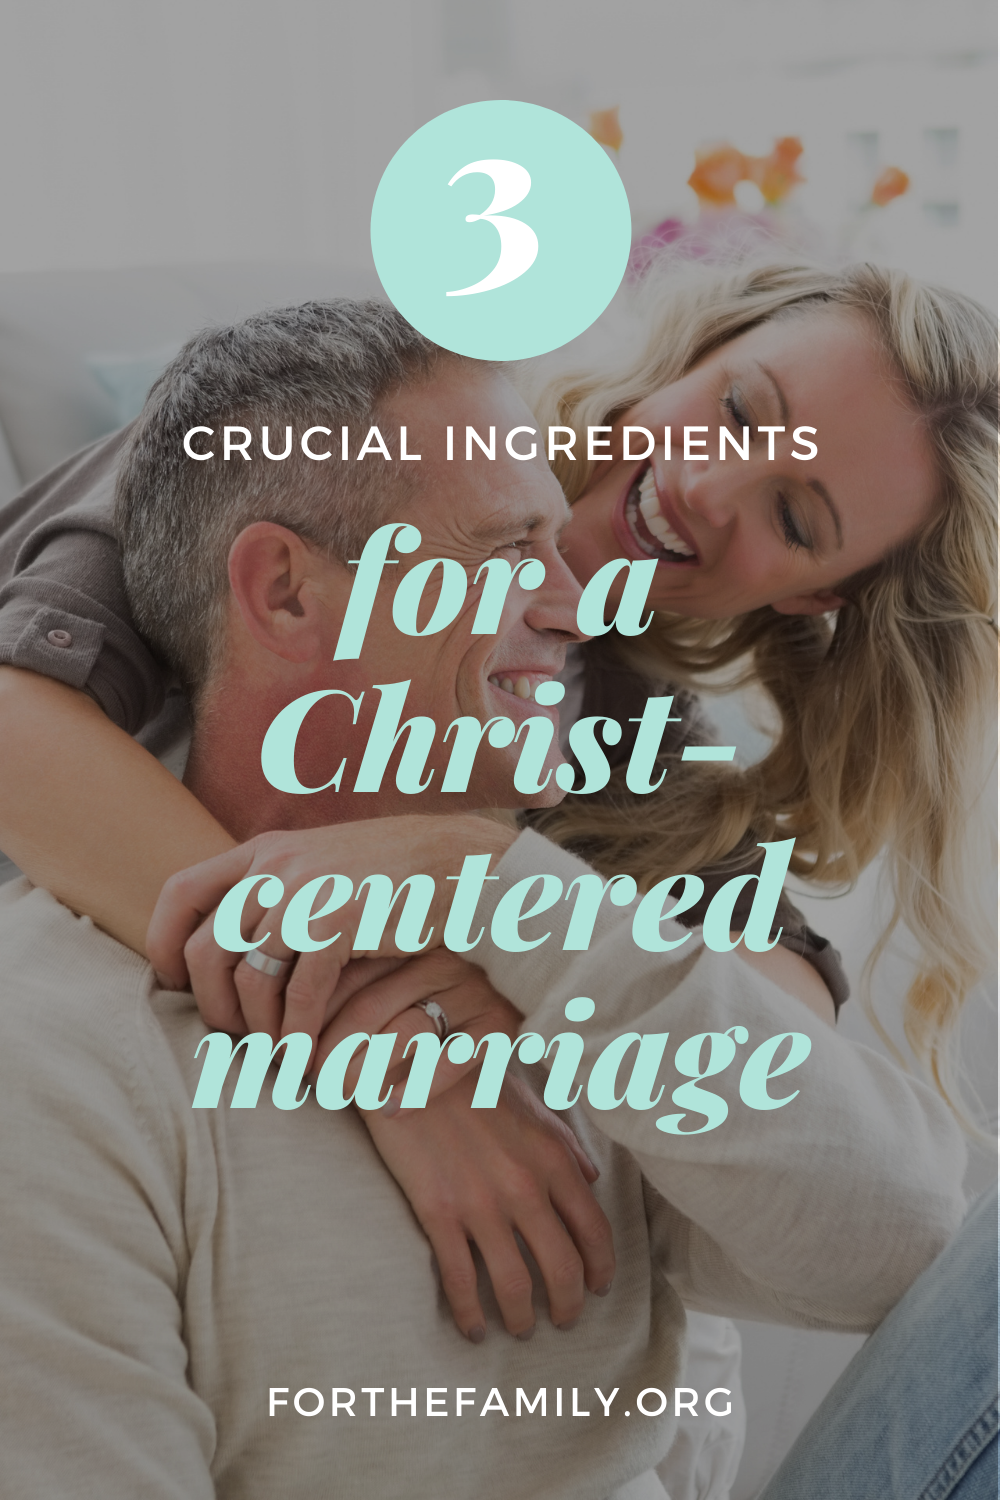 3 Crucial Ingredients for a Christ-Centered Marriage